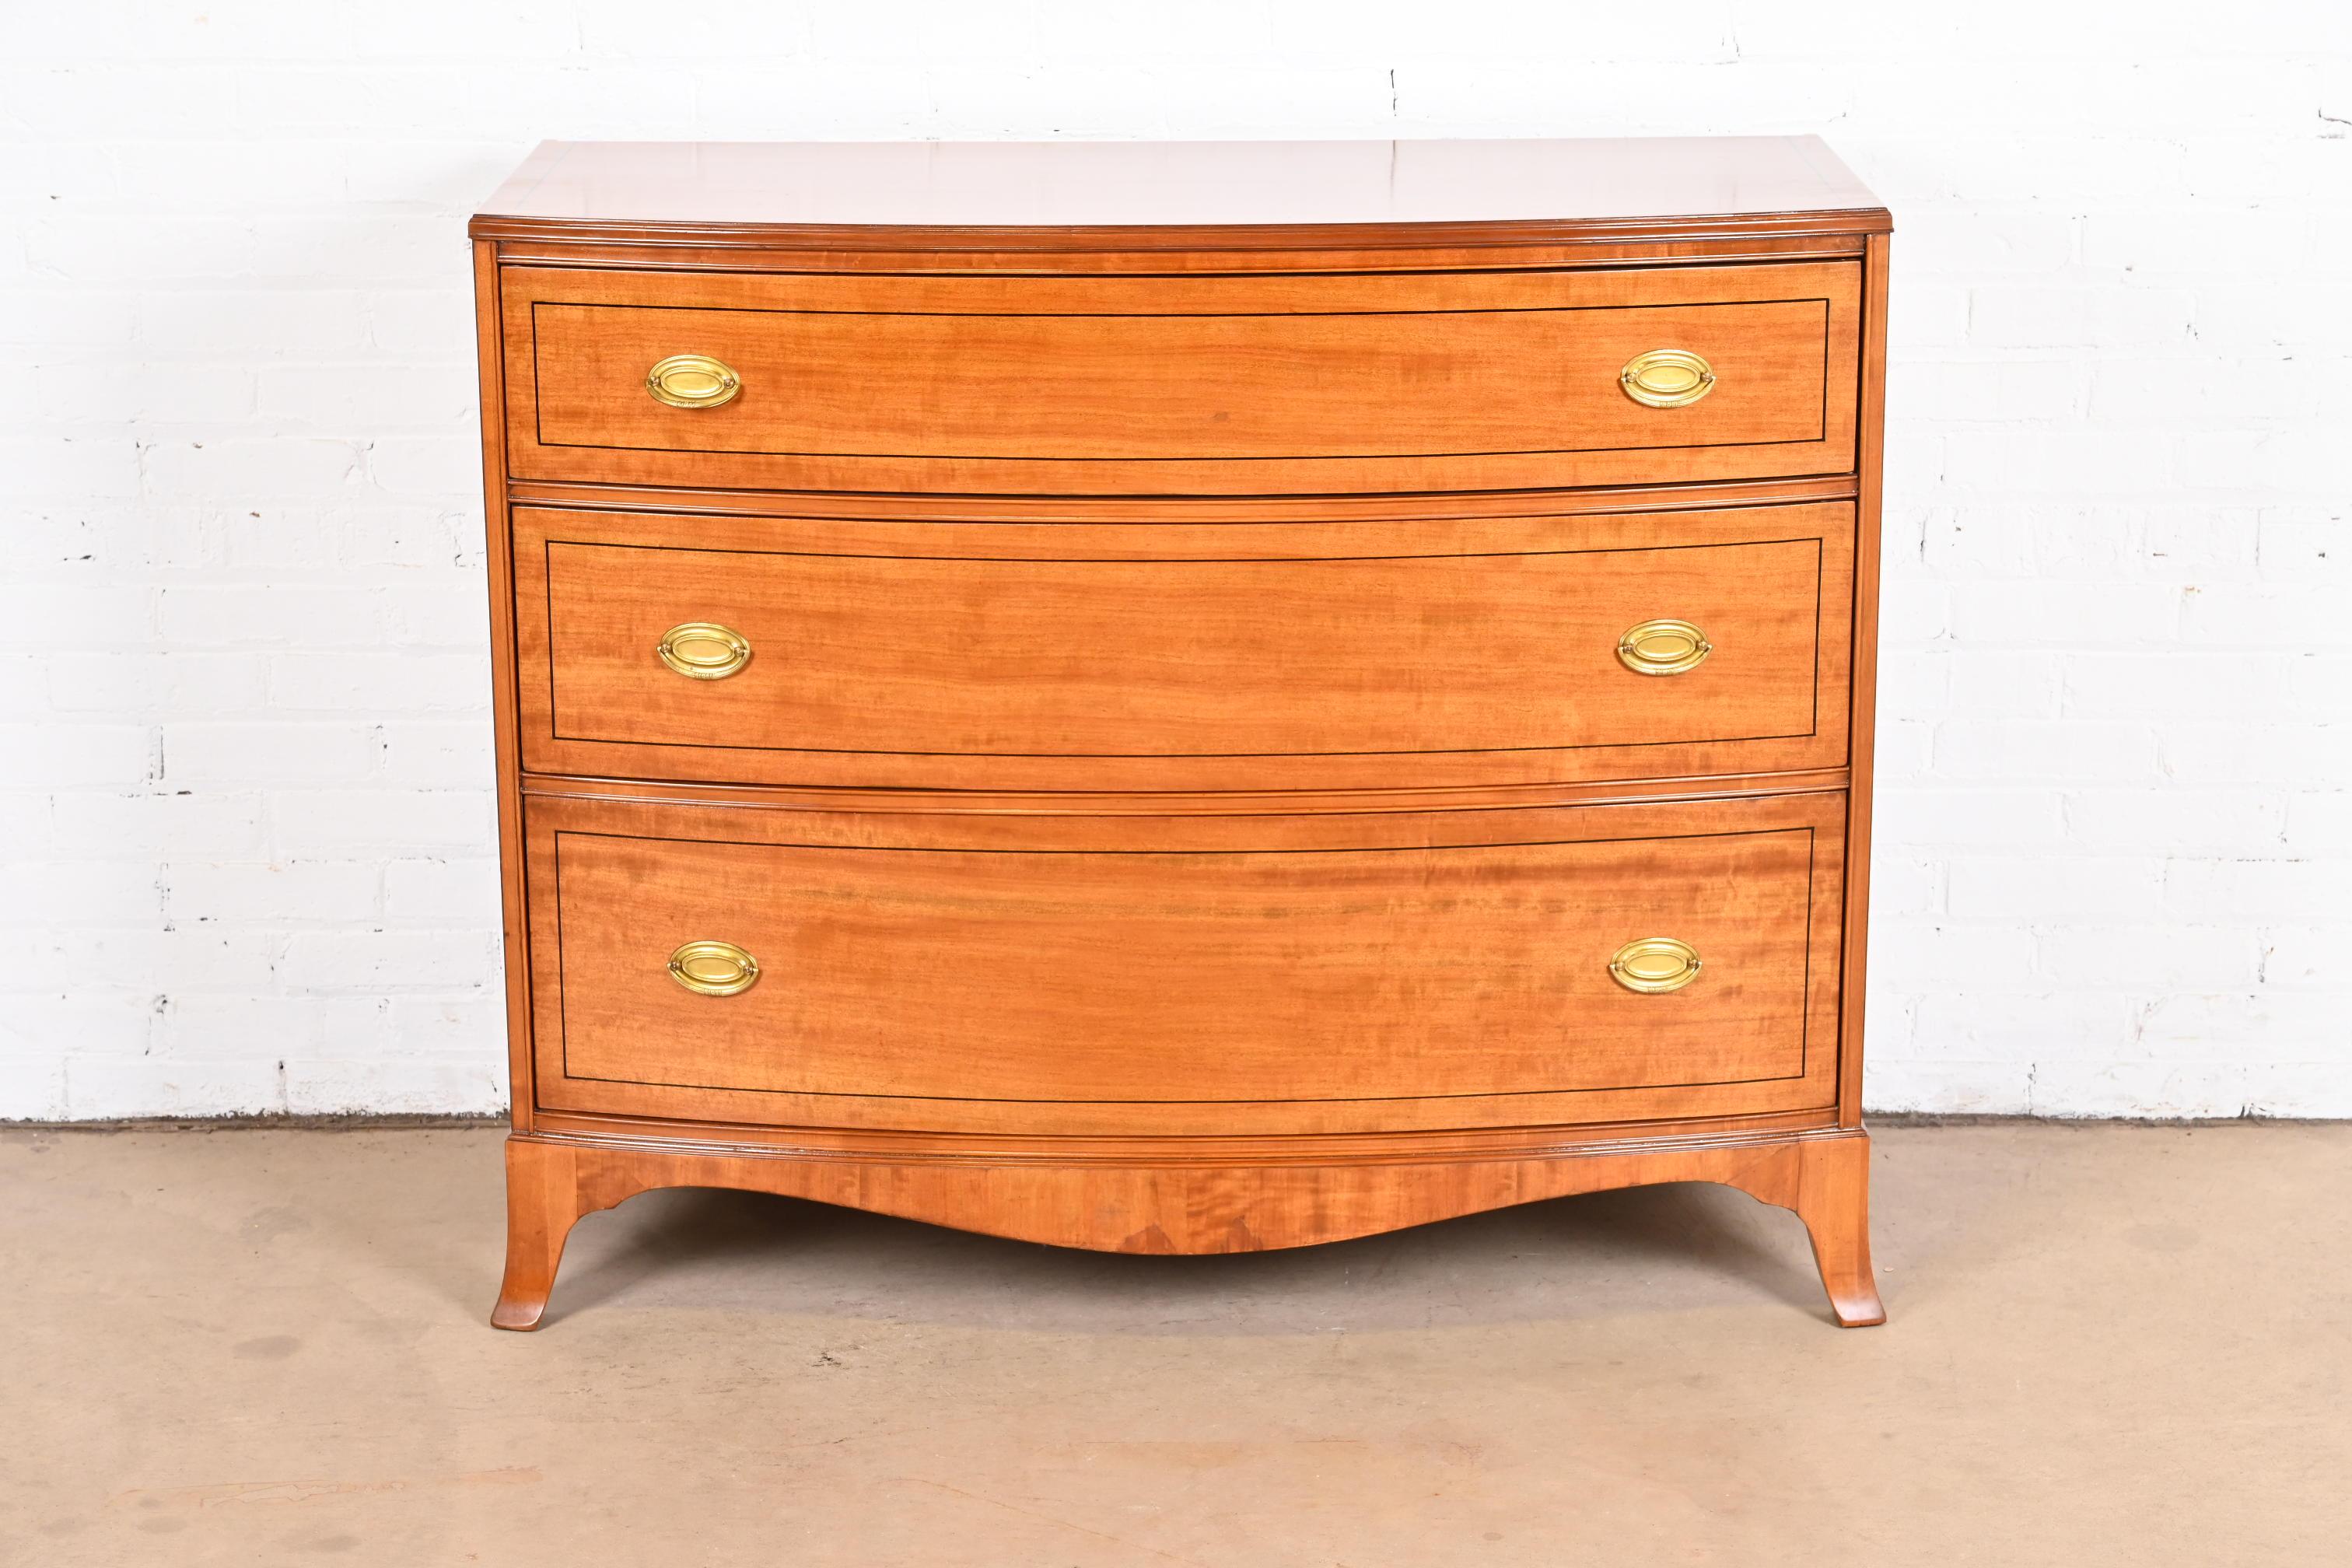 An exceptional Georgian style dresser chest or commode

In the manner of Baker Furniture

USA, Mid-20th Century

Mahogany, with ebony string inlay and original brass hardware.

Measures: 48